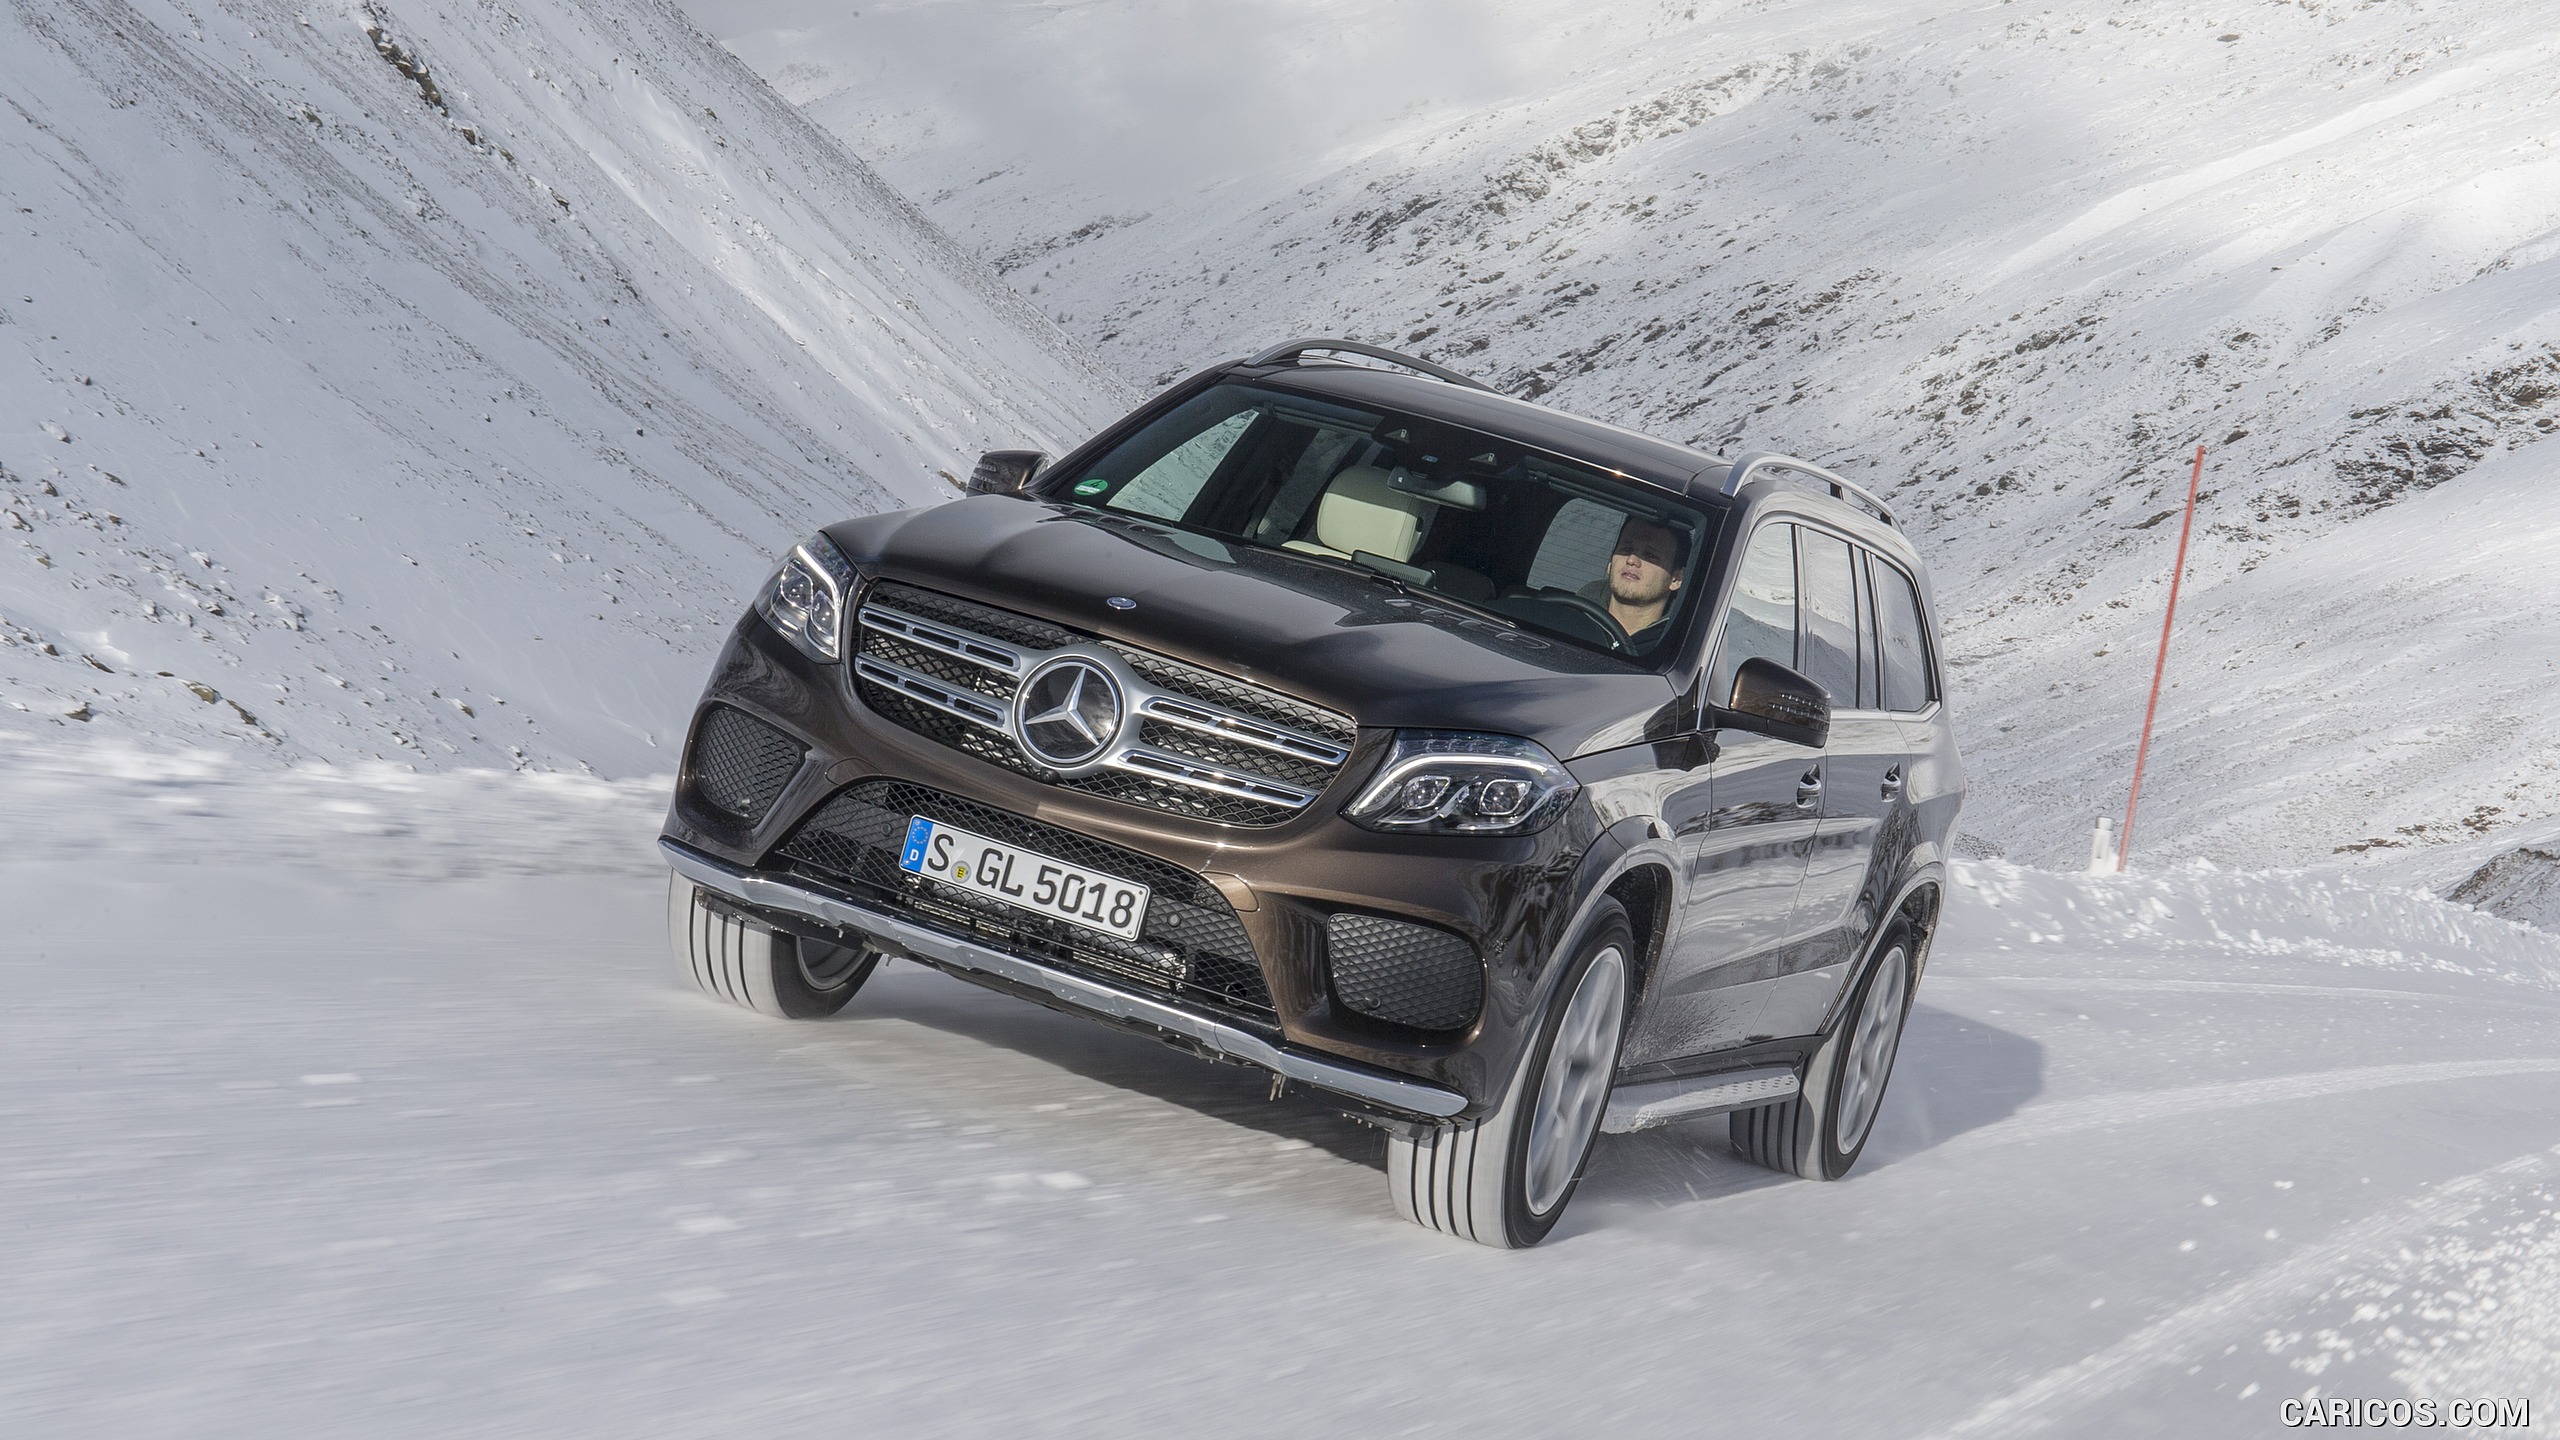 2017 Mercedes-Benz GLS 350d 4MATIC AMG Line in Snow - Front, #178 of 255